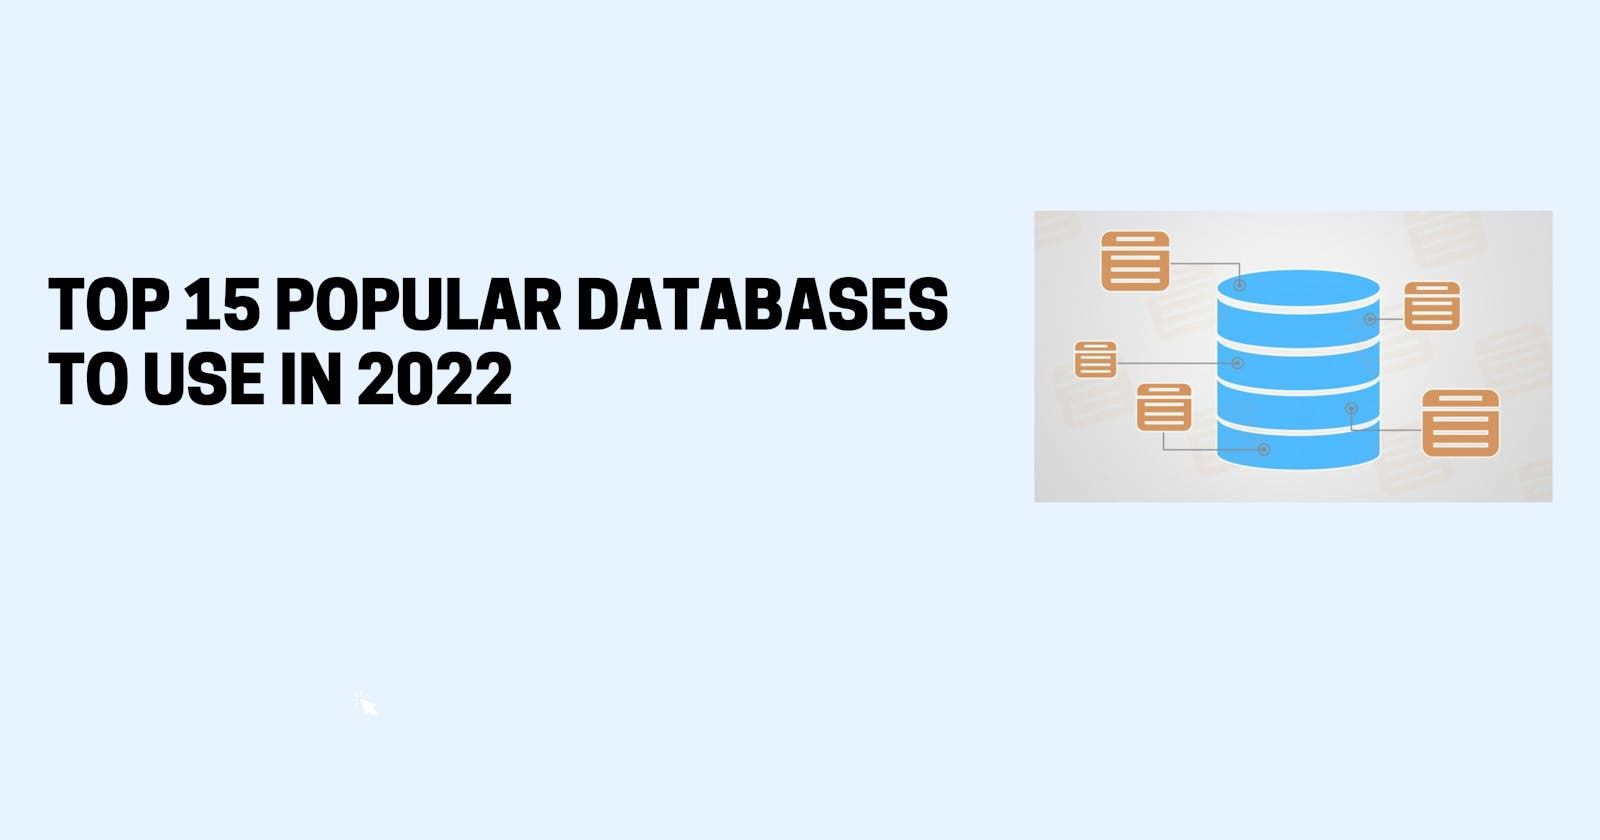 Top 15 Popular Databases to Use in 2022